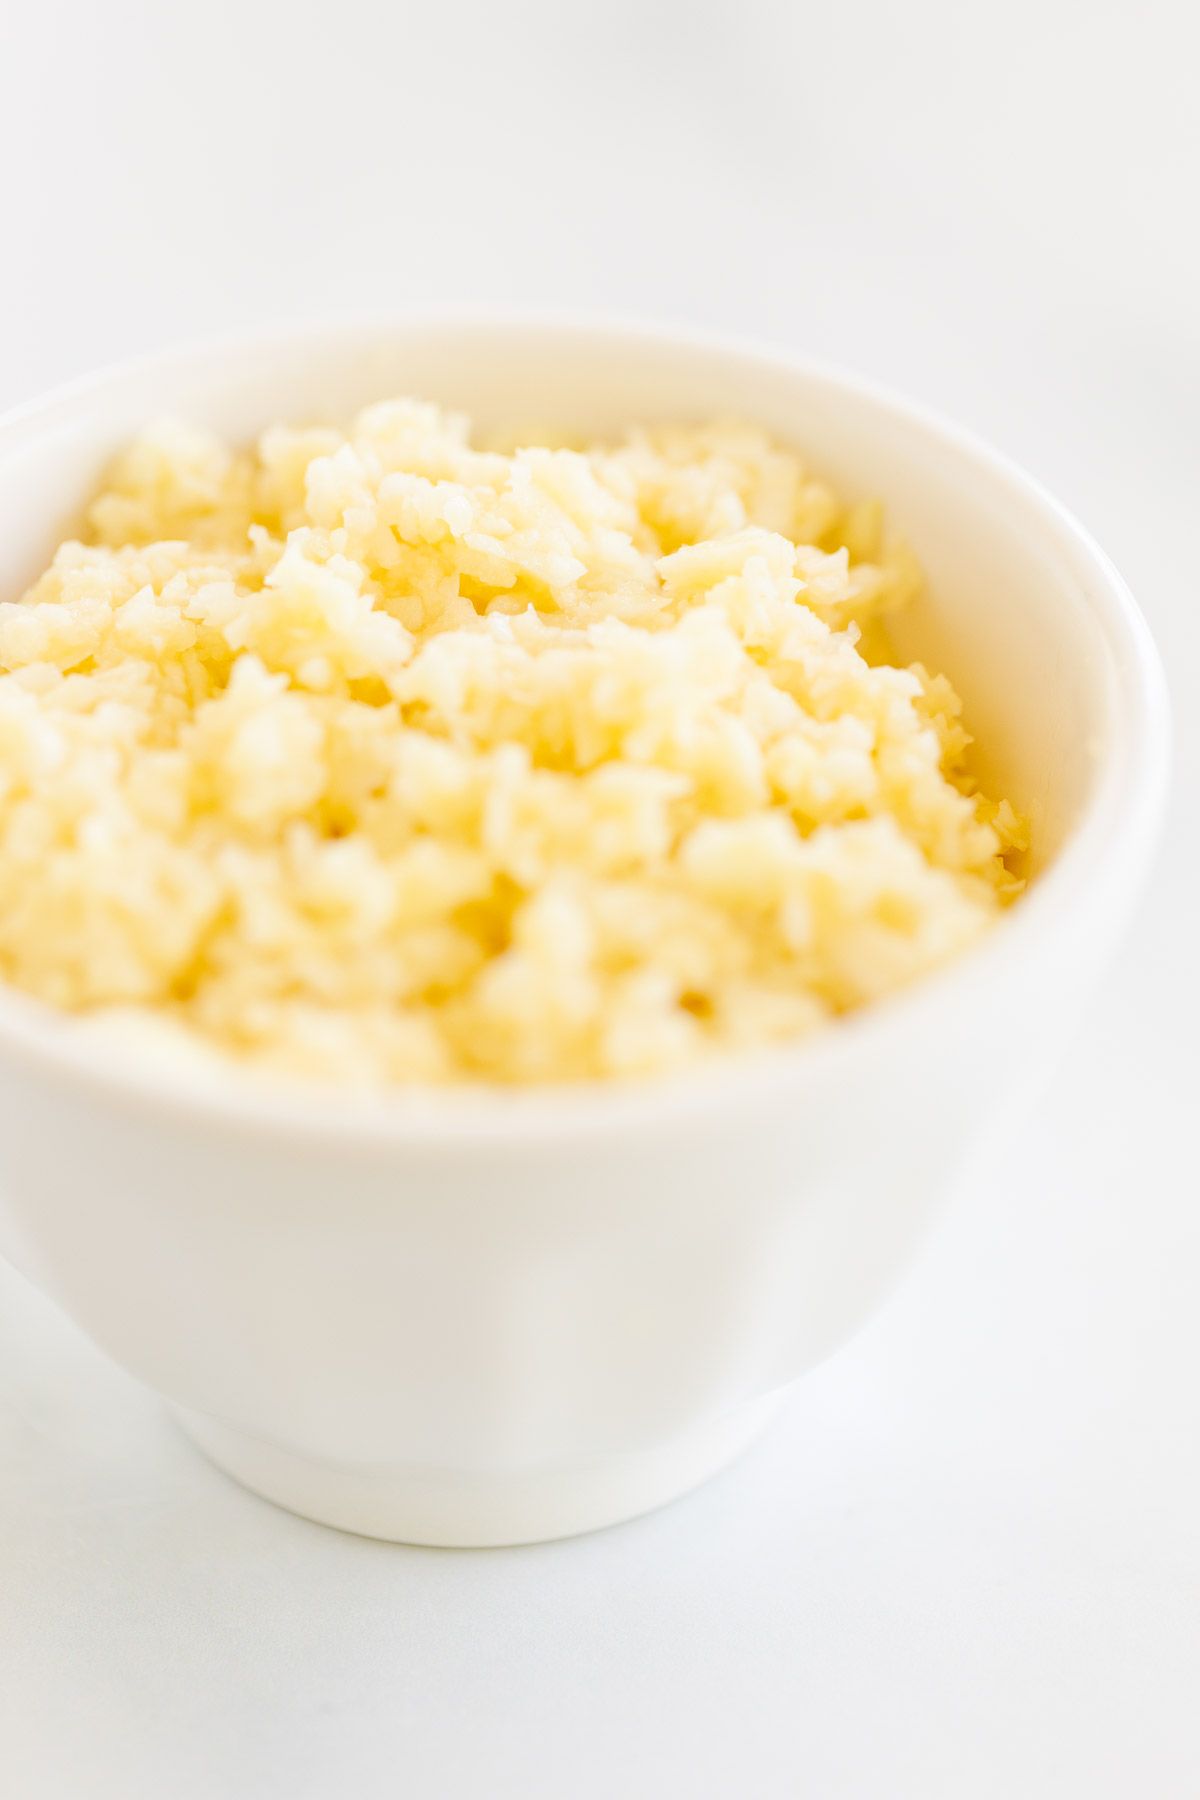 A close up of minced garlic in a white bowl.